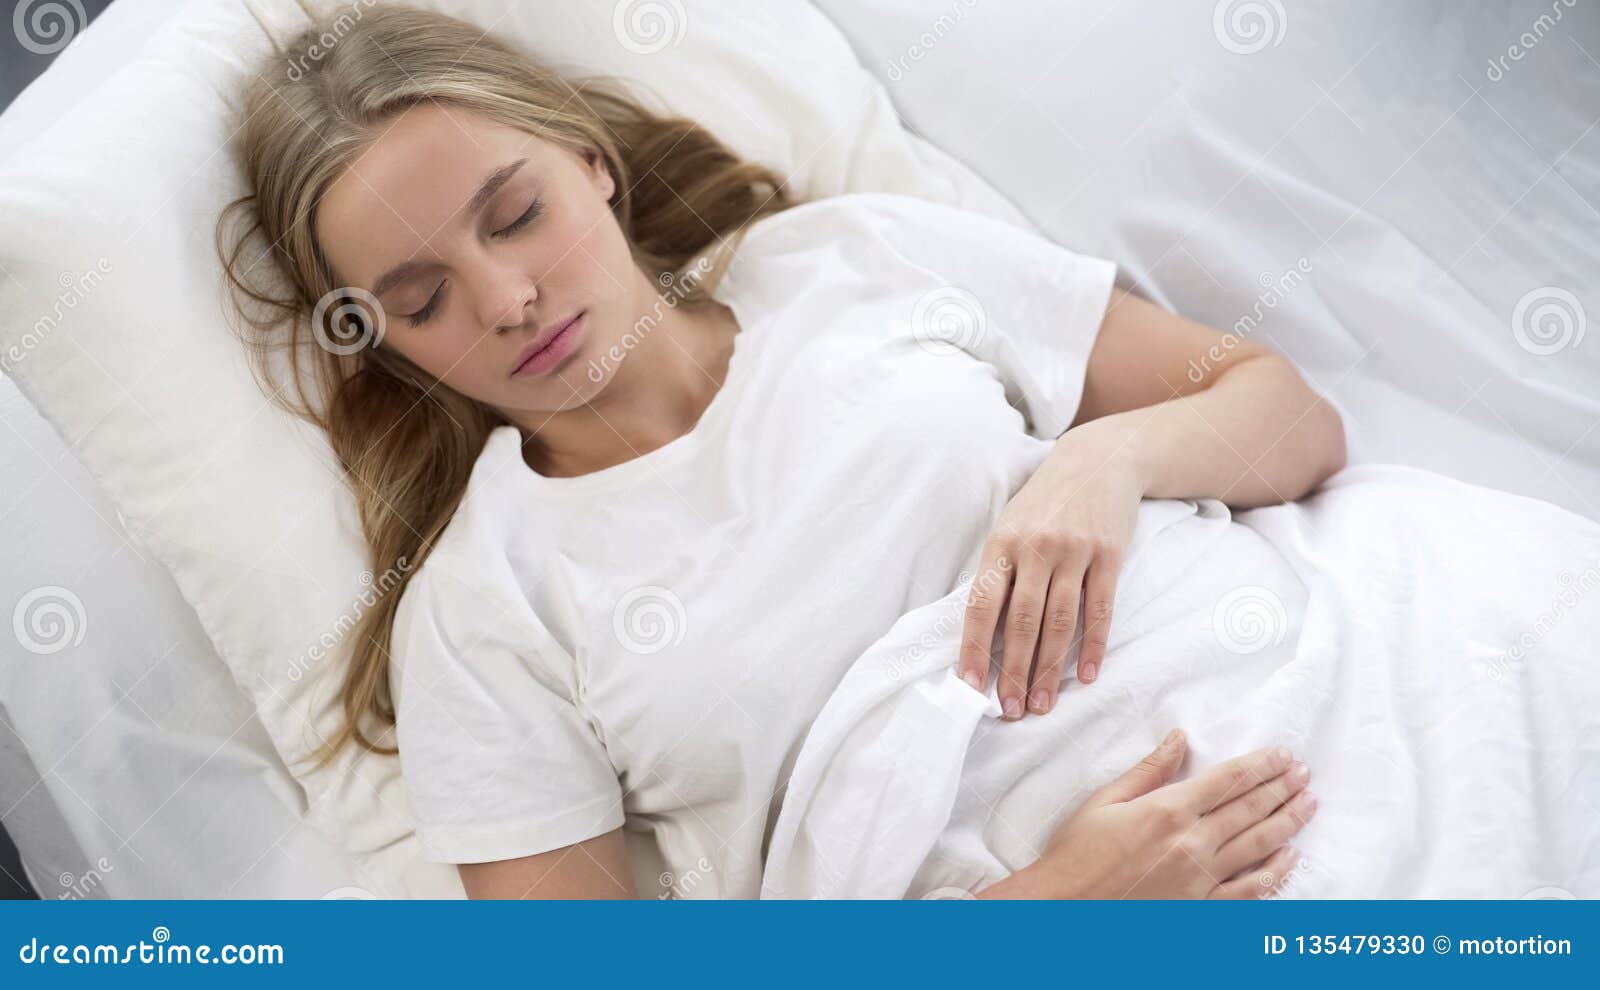 Pretty Teenager Peacefully Sleeping In Bed Relaxing In Morning Dream